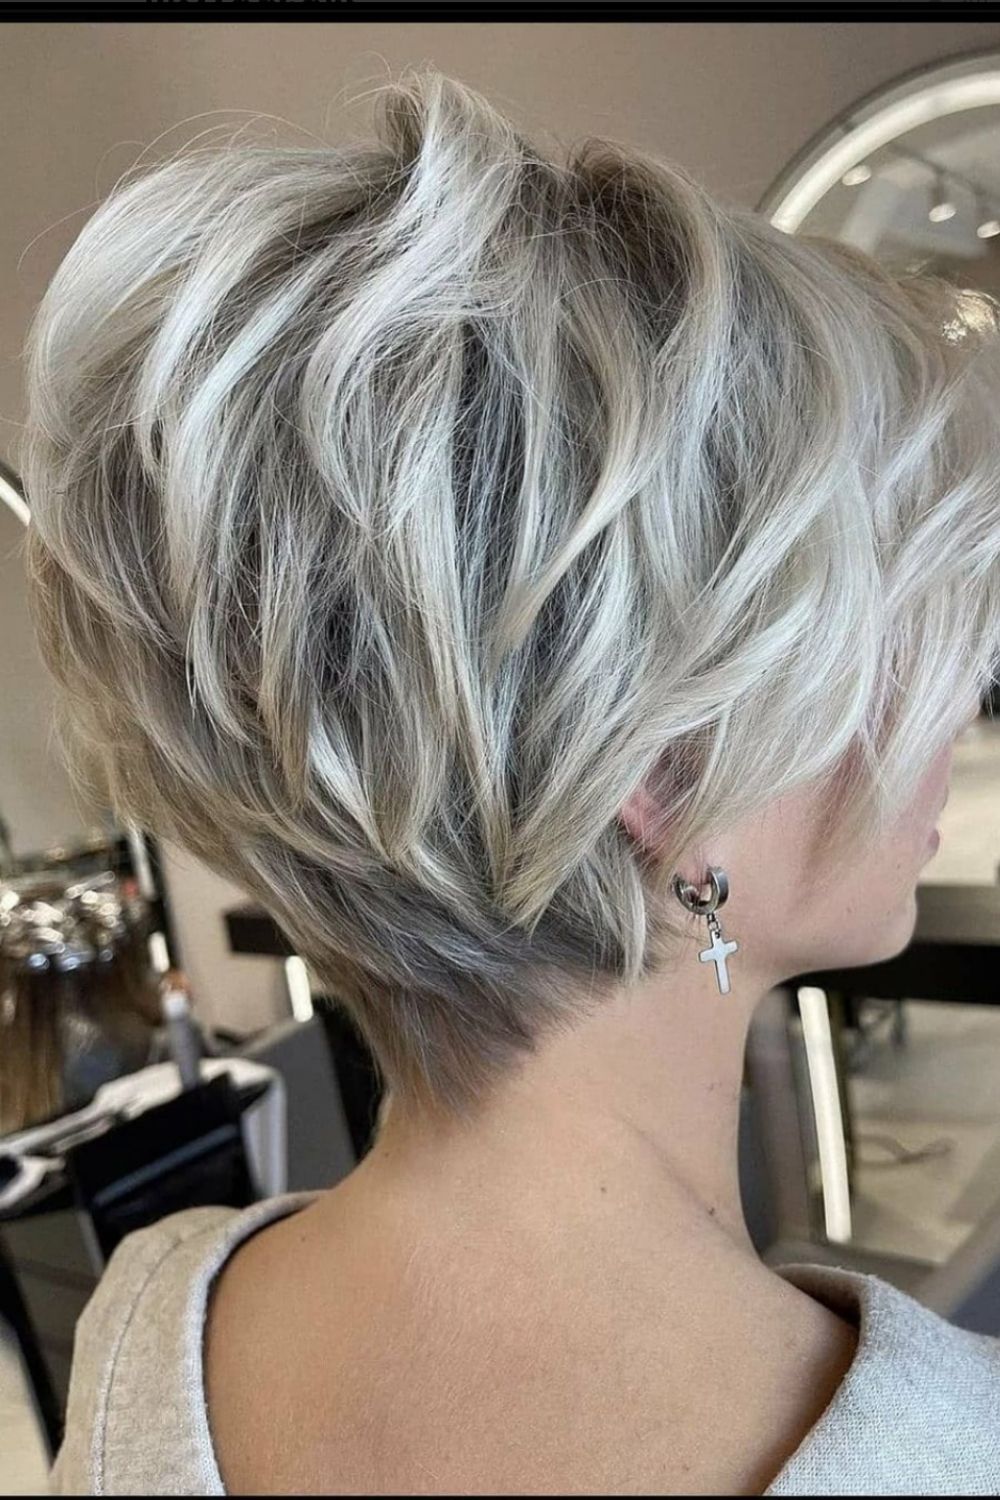 Best short pixie cut and short hairstyle for cool women